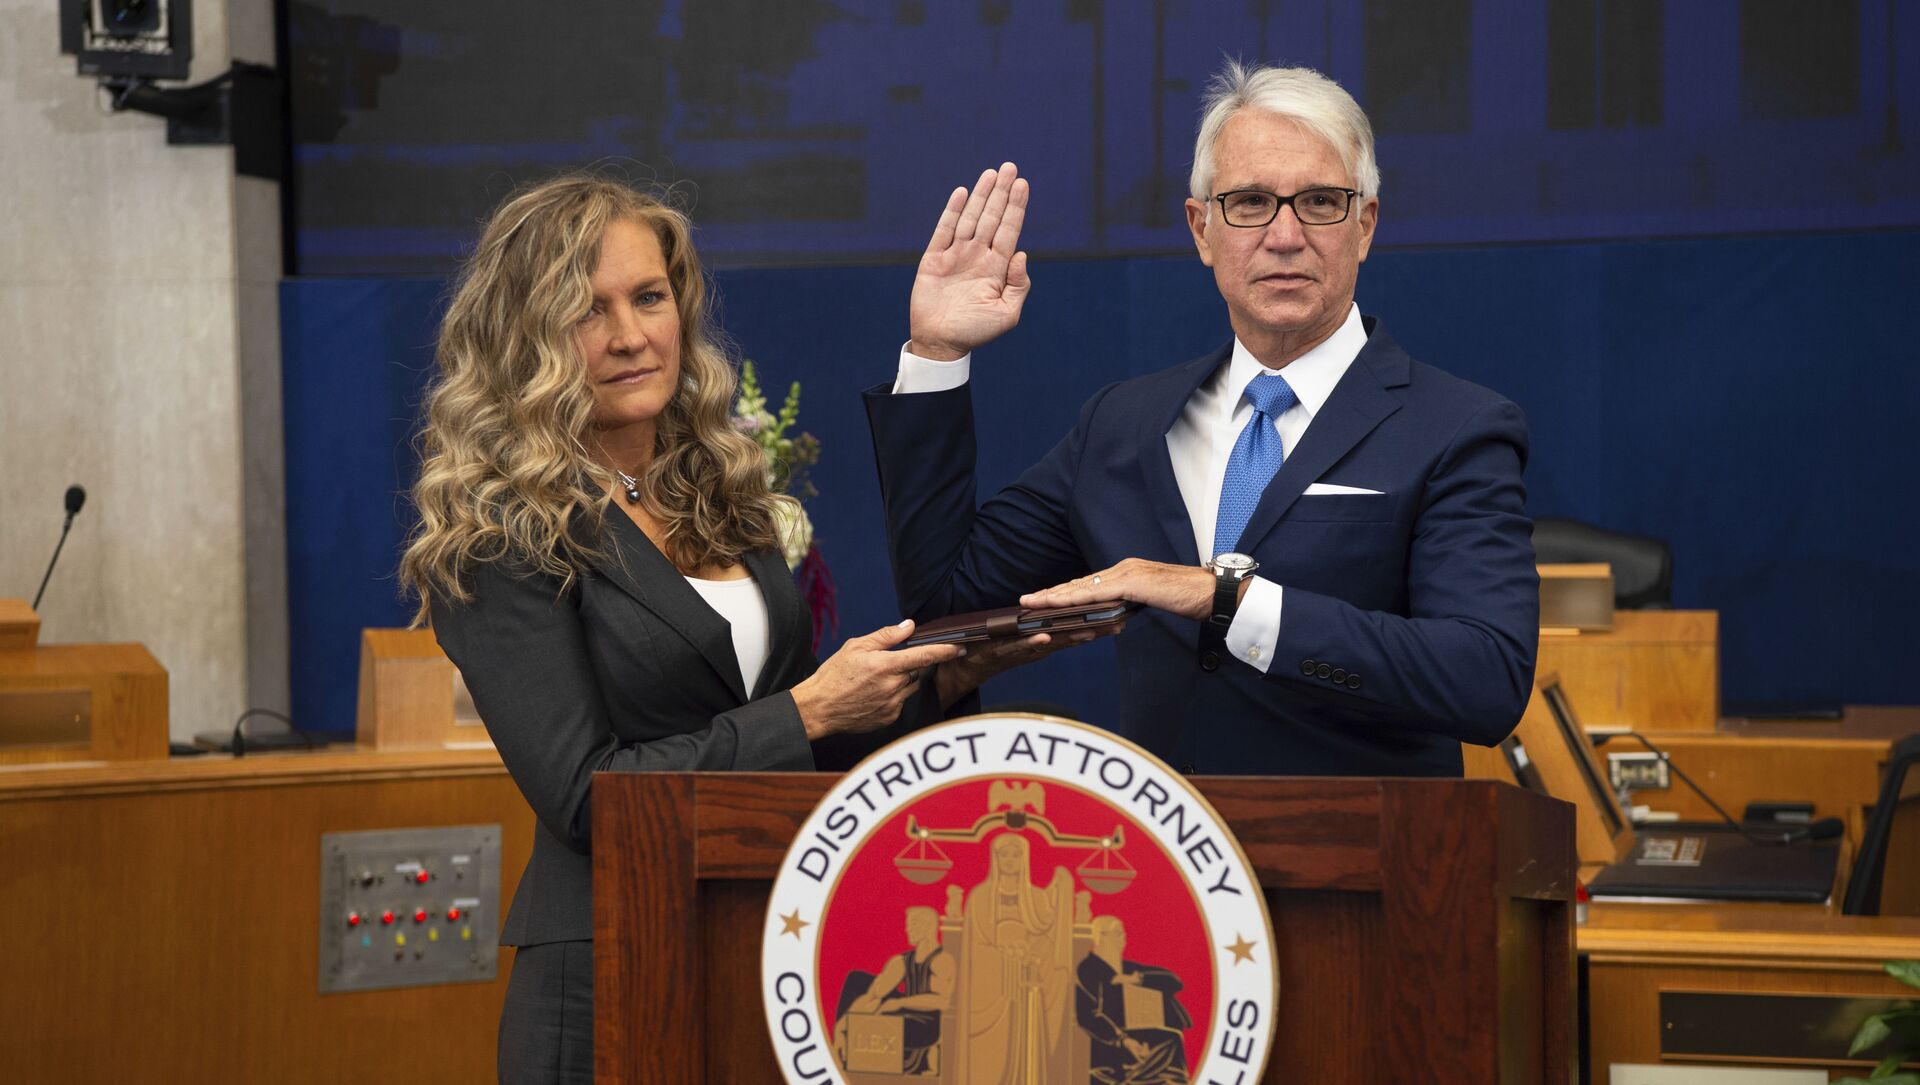 In this photo provided by the County of Los Angeles, incoming Los Angeles County District Attorney George Gascon is sworn in as his wife Fabiola Kramsky holds a copy of the Constitution during a mostly-virtual ceremony in downtown Los Angeles Monday, Dec. 7, 2020 - Sputnik International, 1920, 17.02.2021